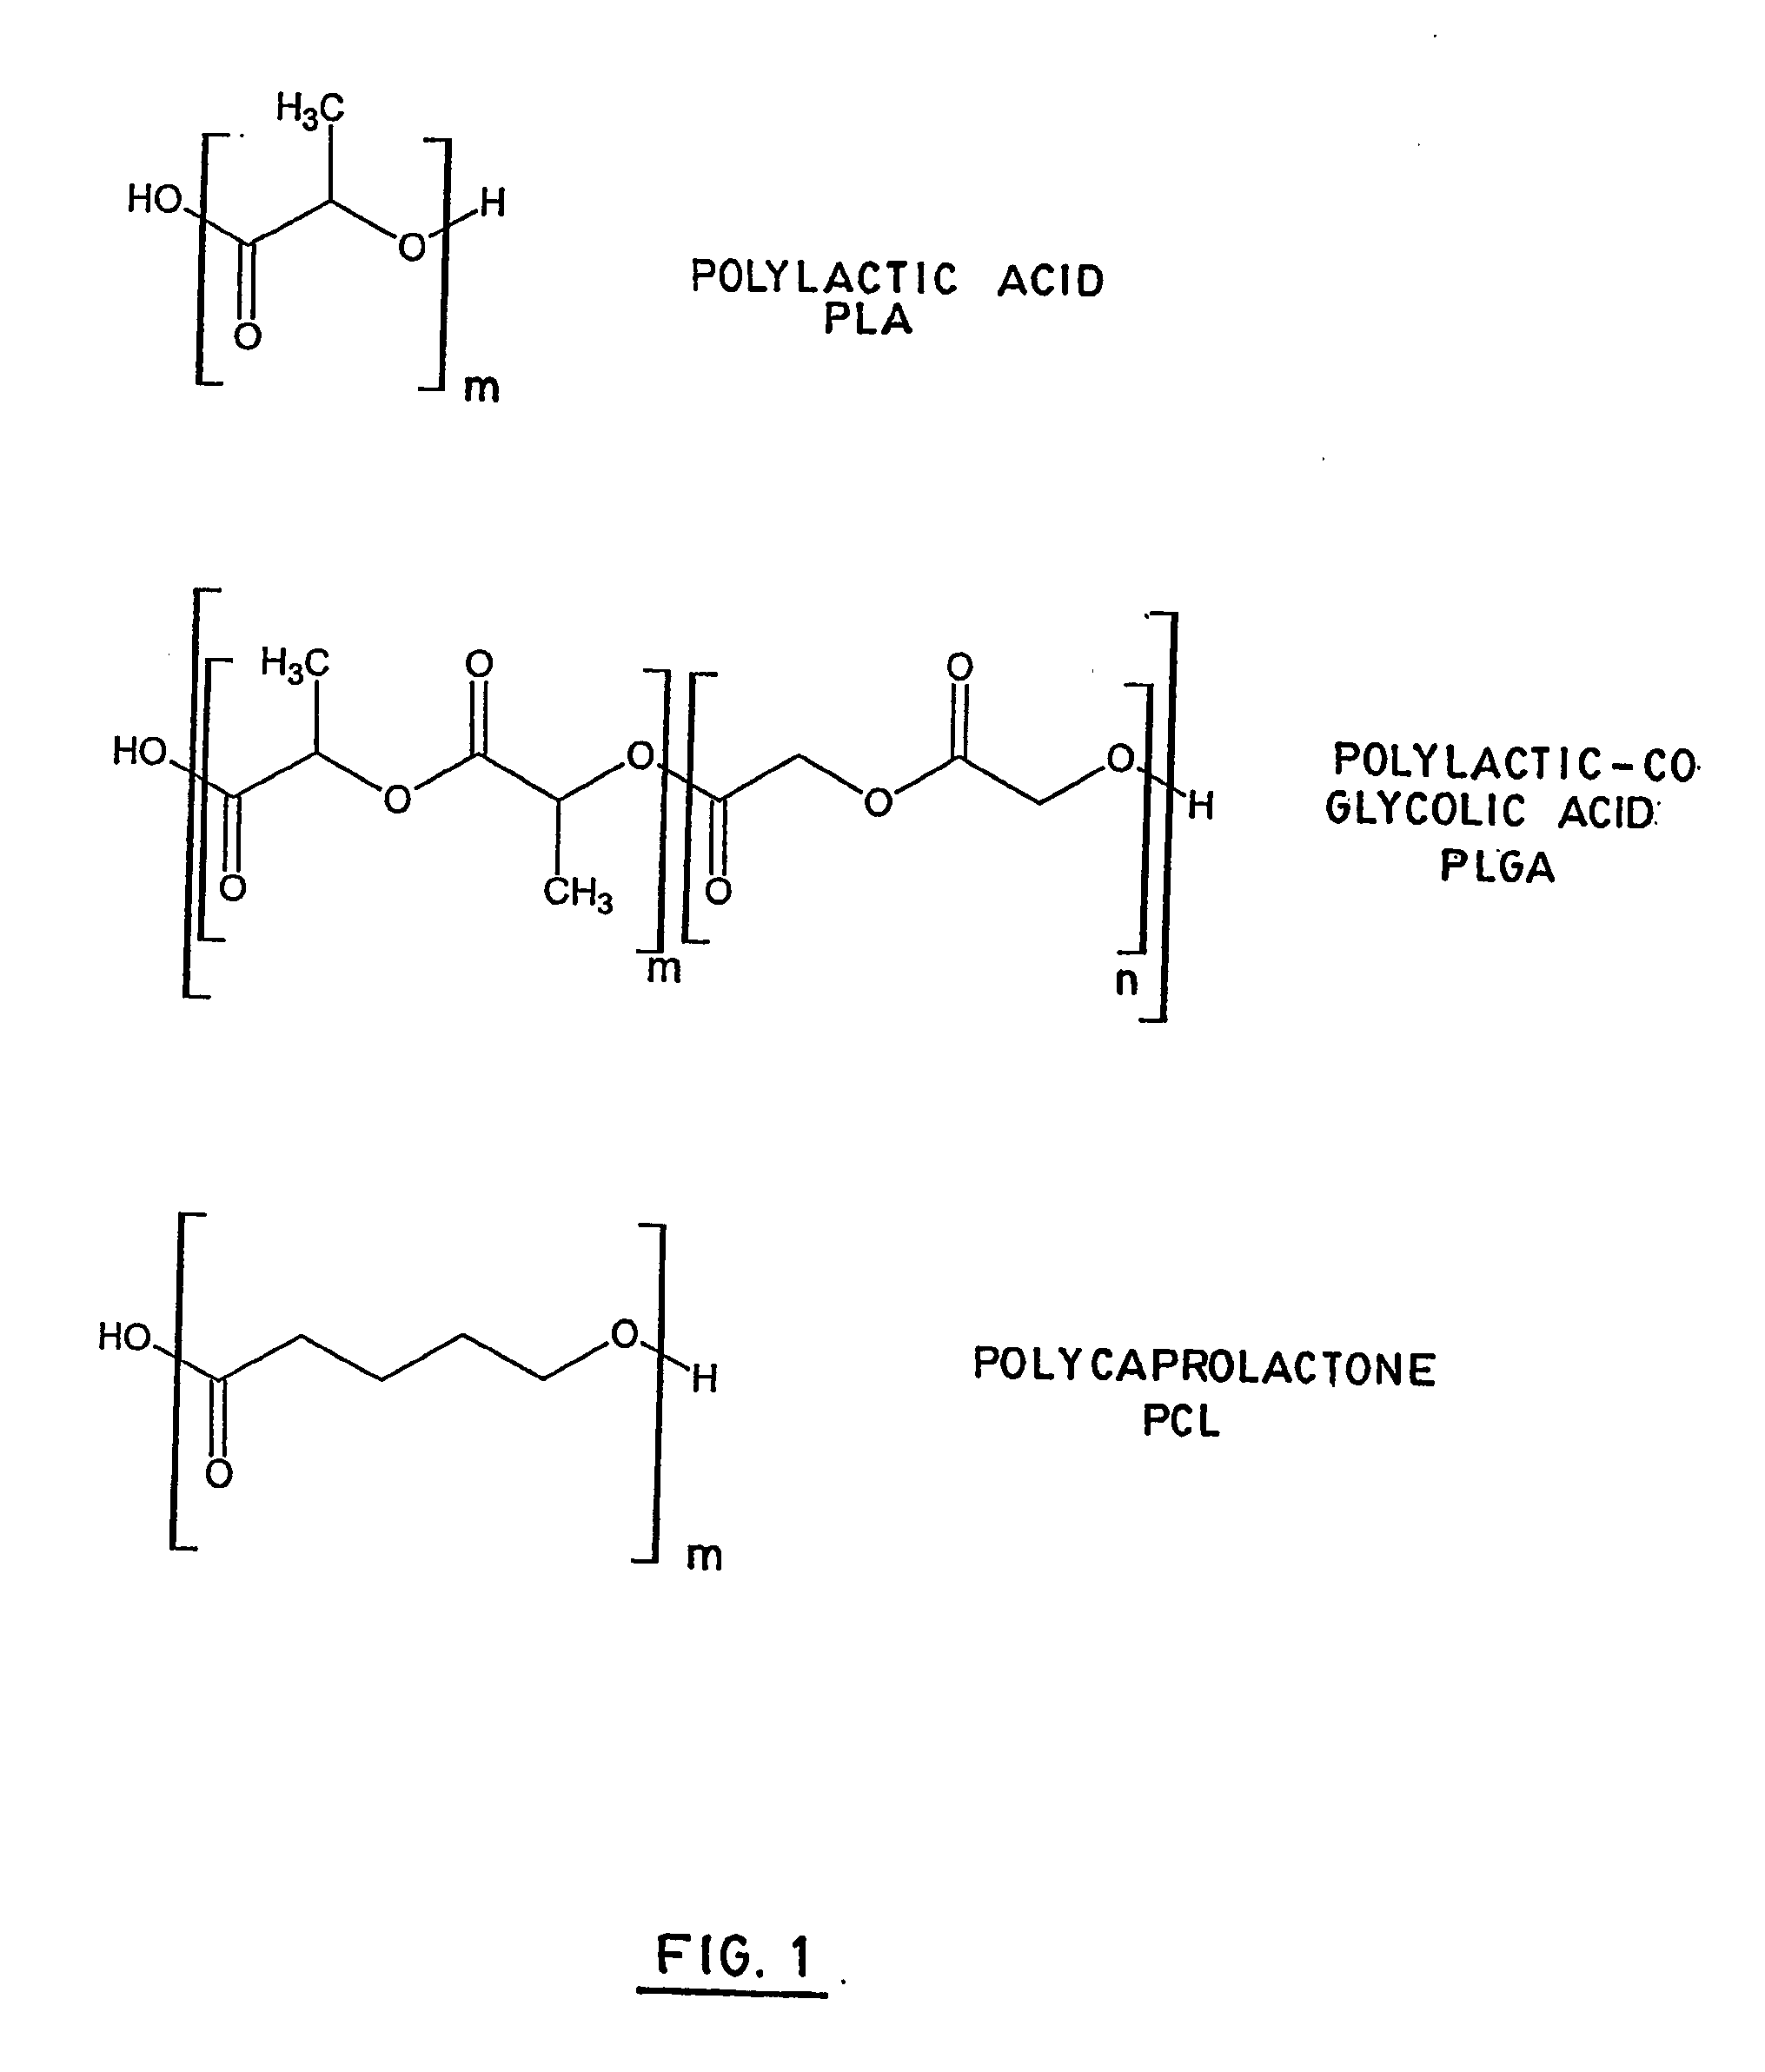 Functionalized polymers and their biomedical and pharmaceutical uses